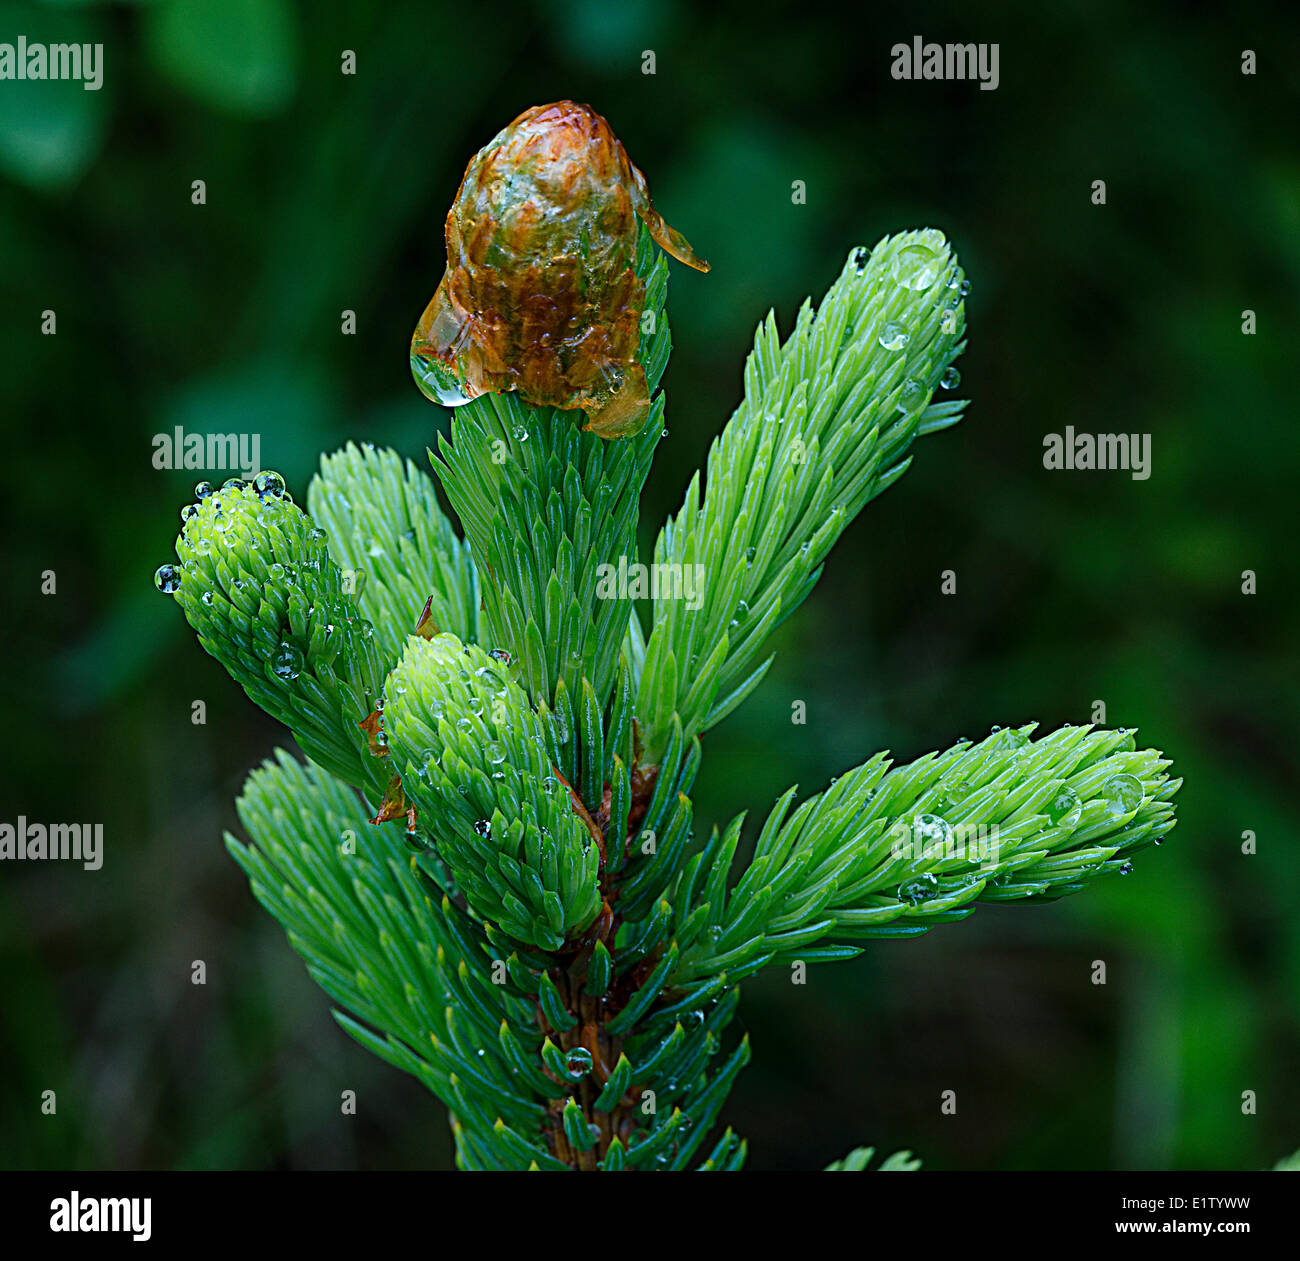 bud opening new shoot growth white spruce Picea glauca white spruce Picea glauca lodgepole pine PInus contorta forest east Stock Photo